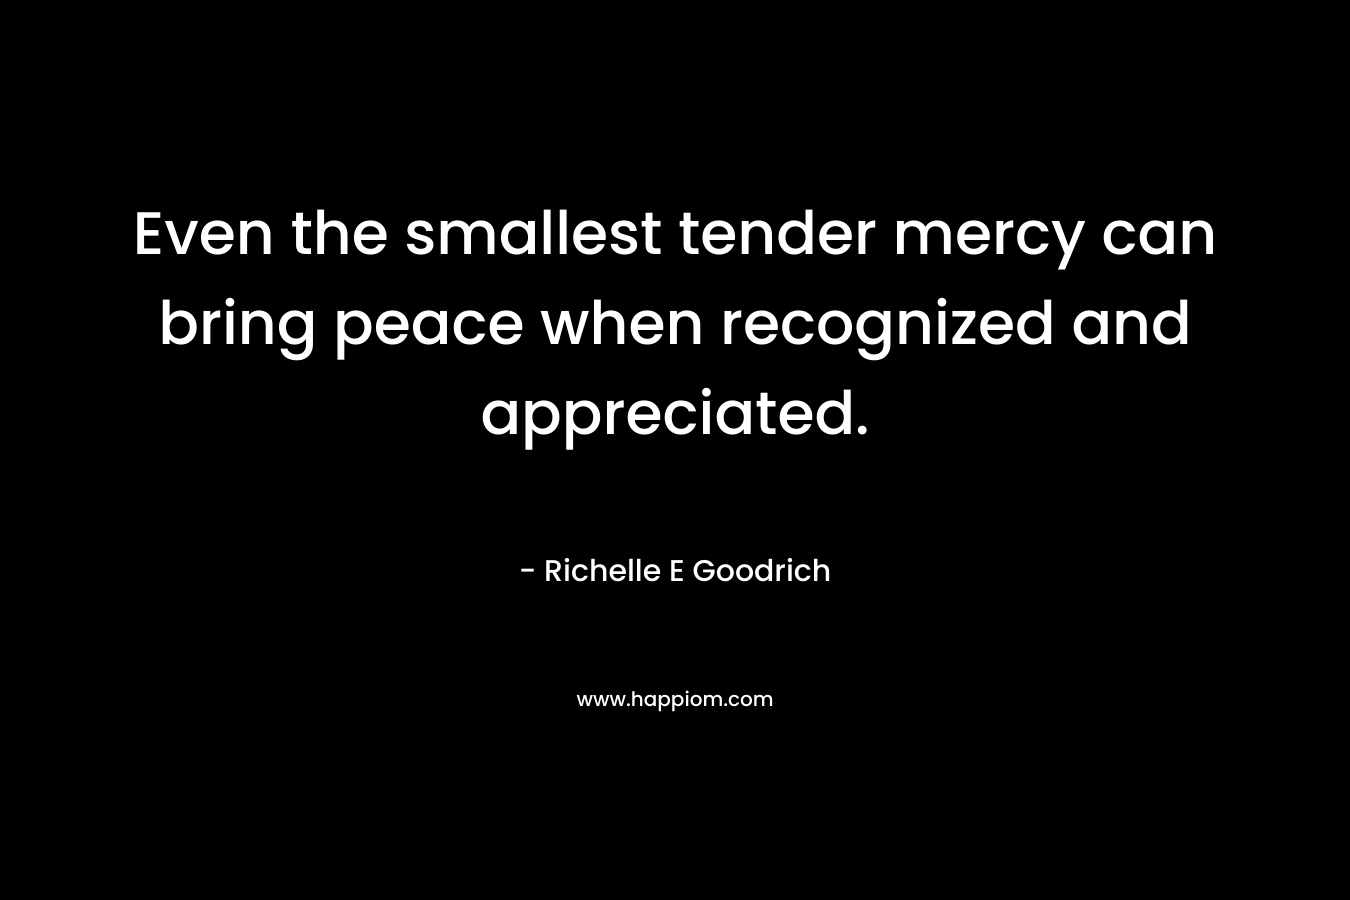 Even the smallest tender mercy can bring peace when recognized and appreciated.